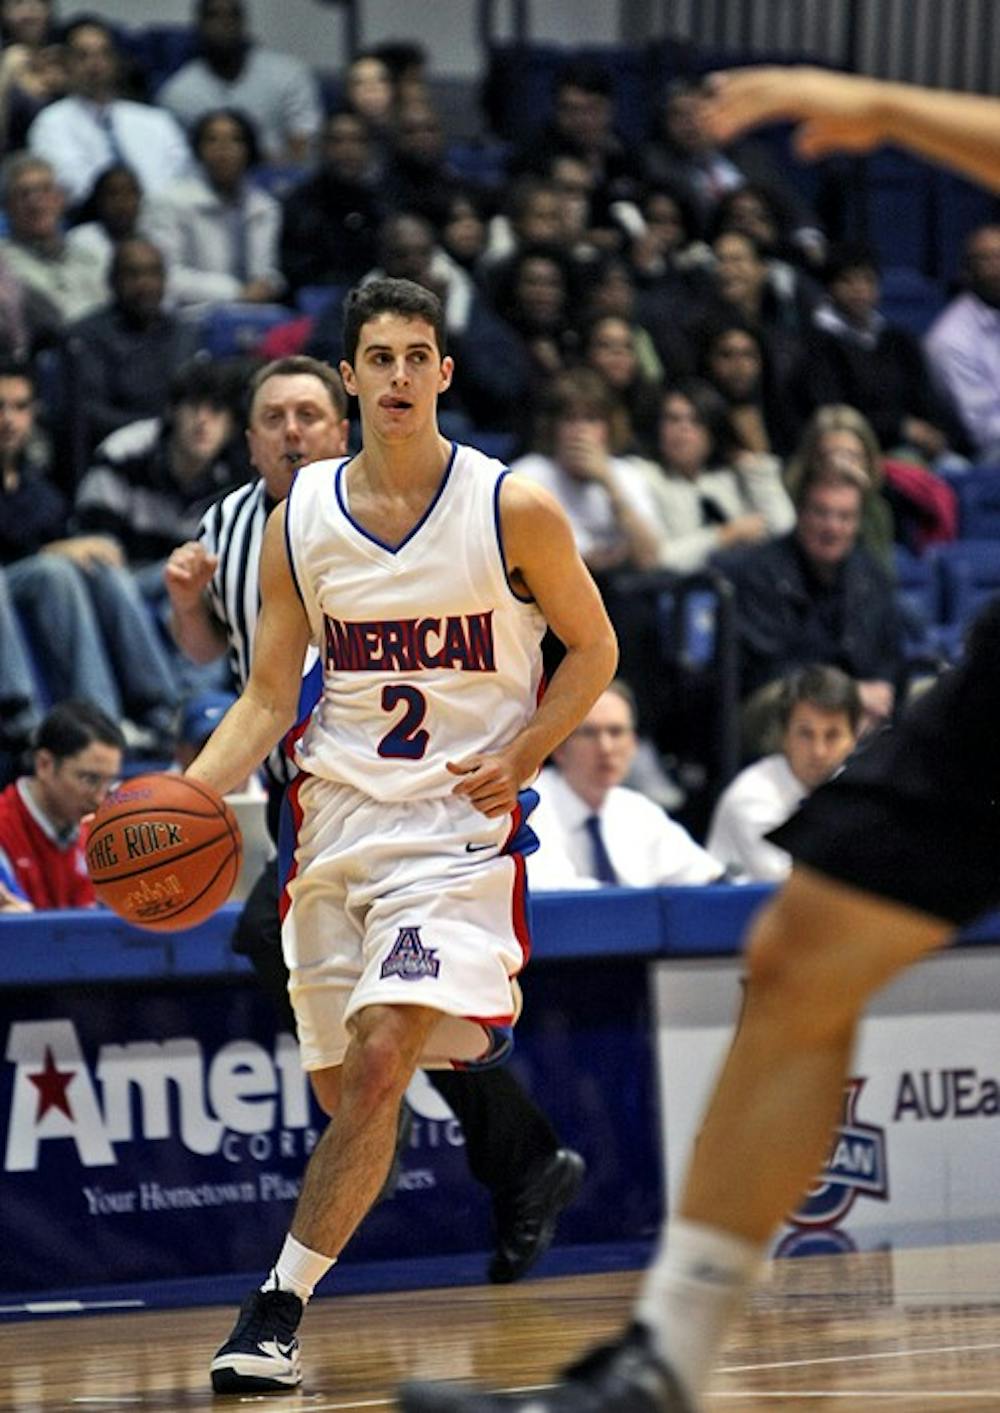 LESS THAN STELLARâ€” Freshman Daniel Munoz takes the ball up the court in a game this year. AU blew an 11-point halftime lead and went on to lose 65-61. This yearâ€™s squad is much differnet than the one that won two straight PL Championships. AU lost its three star players to graduation.